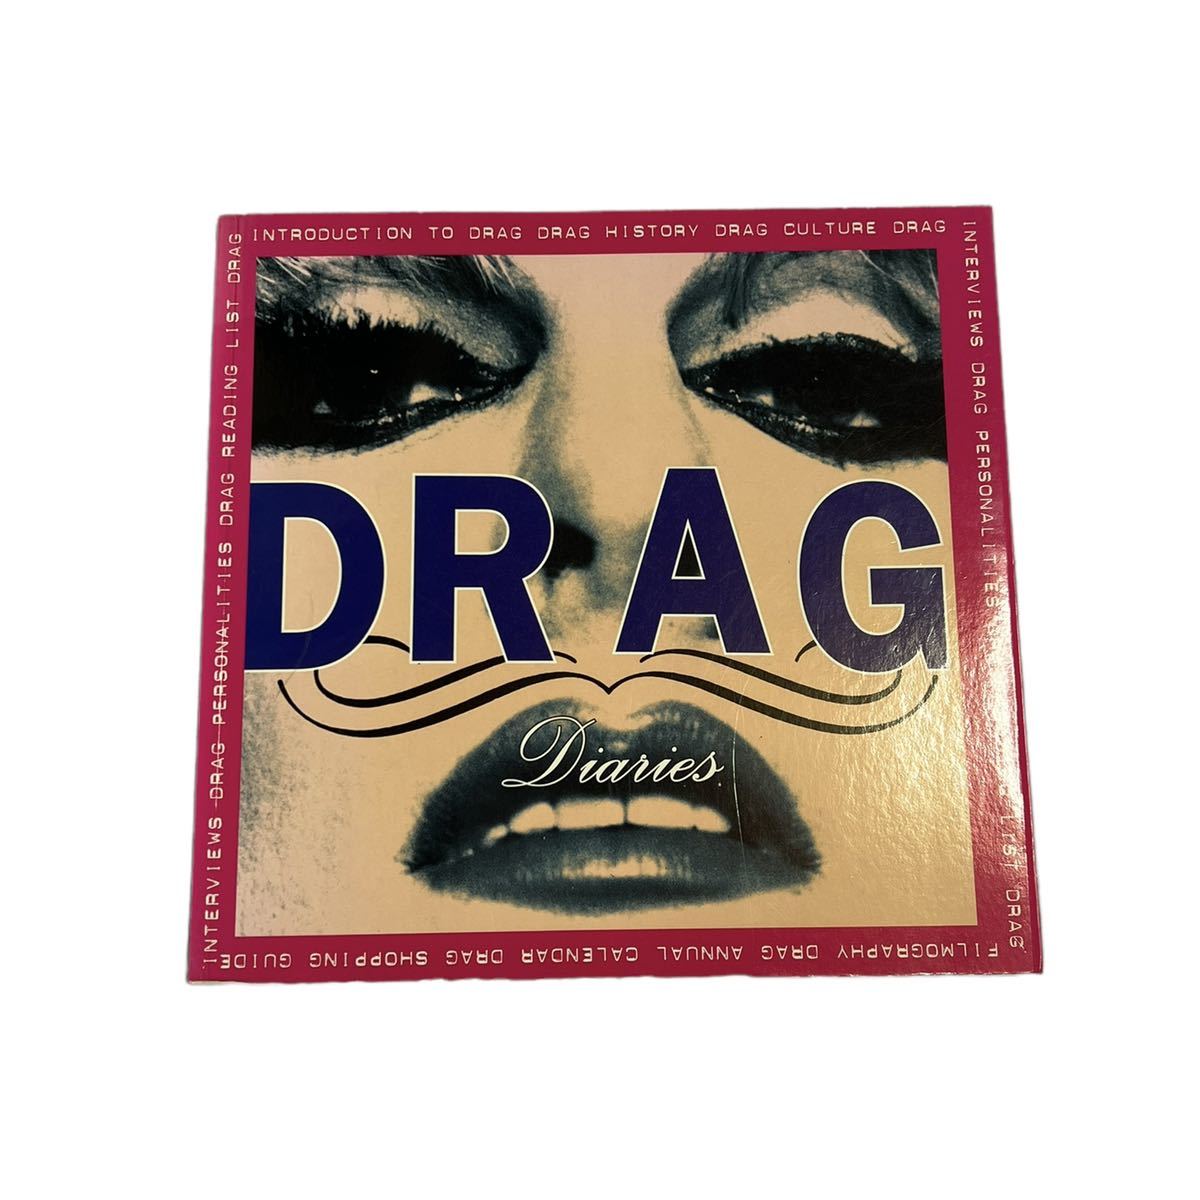 [DRAG DIARIES] drug * dia Lee z foreign book photoalbum materials compilation difference law medicine thing large flax history culture medicine 